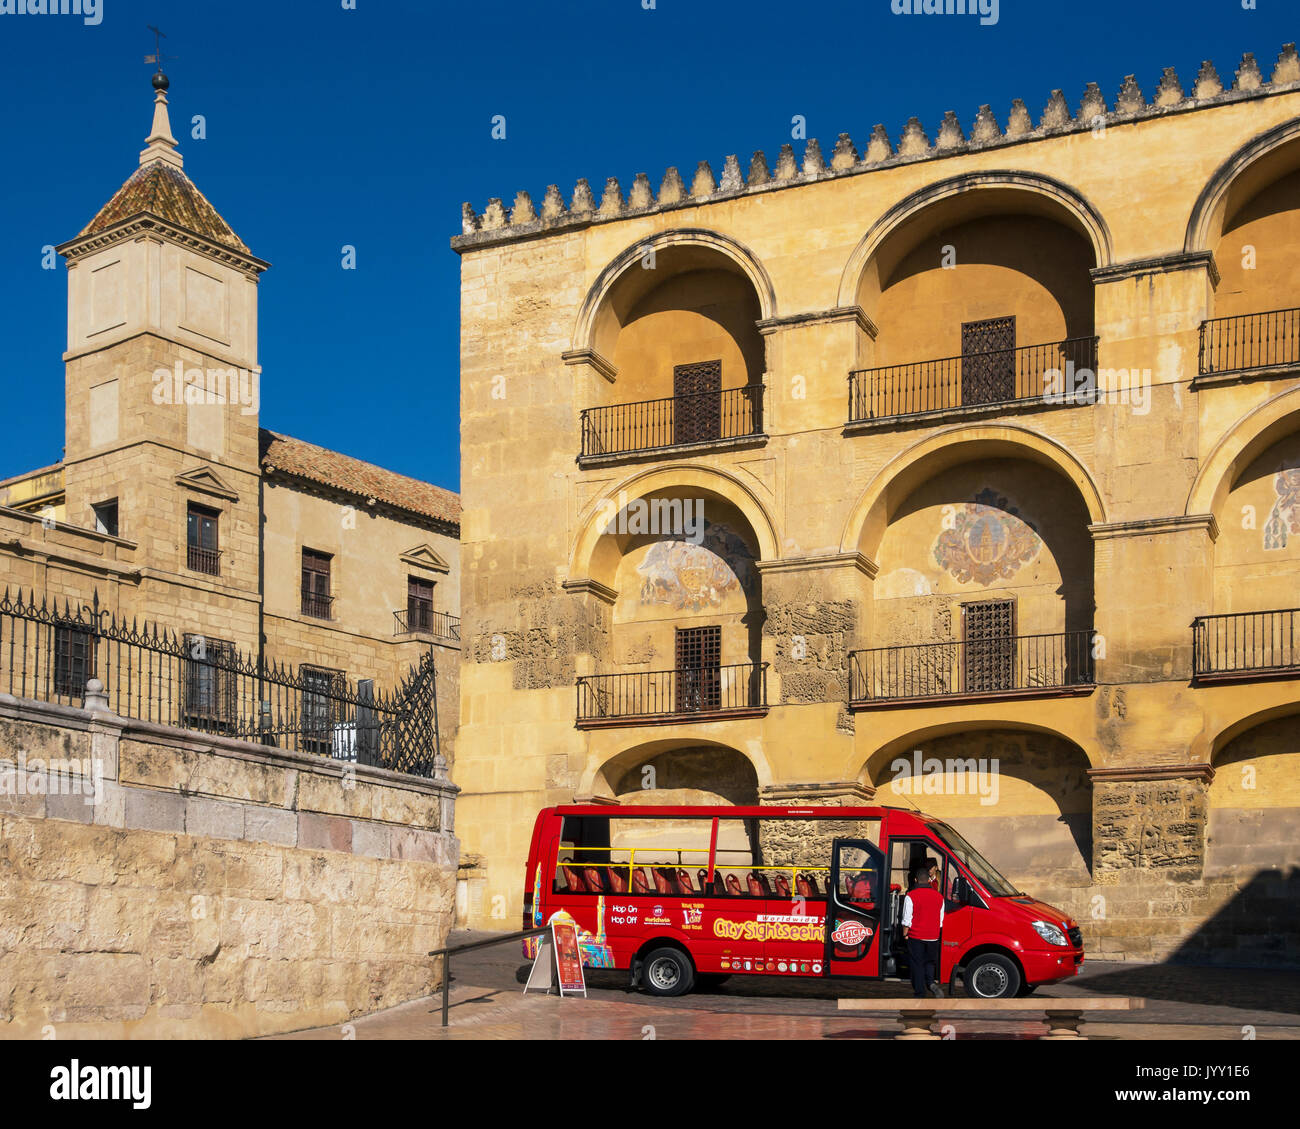 CORDOBA, SPAIN - MARCH 12, 2016: Red City Sightseeing bus in front of the Cathedral Stock Photo